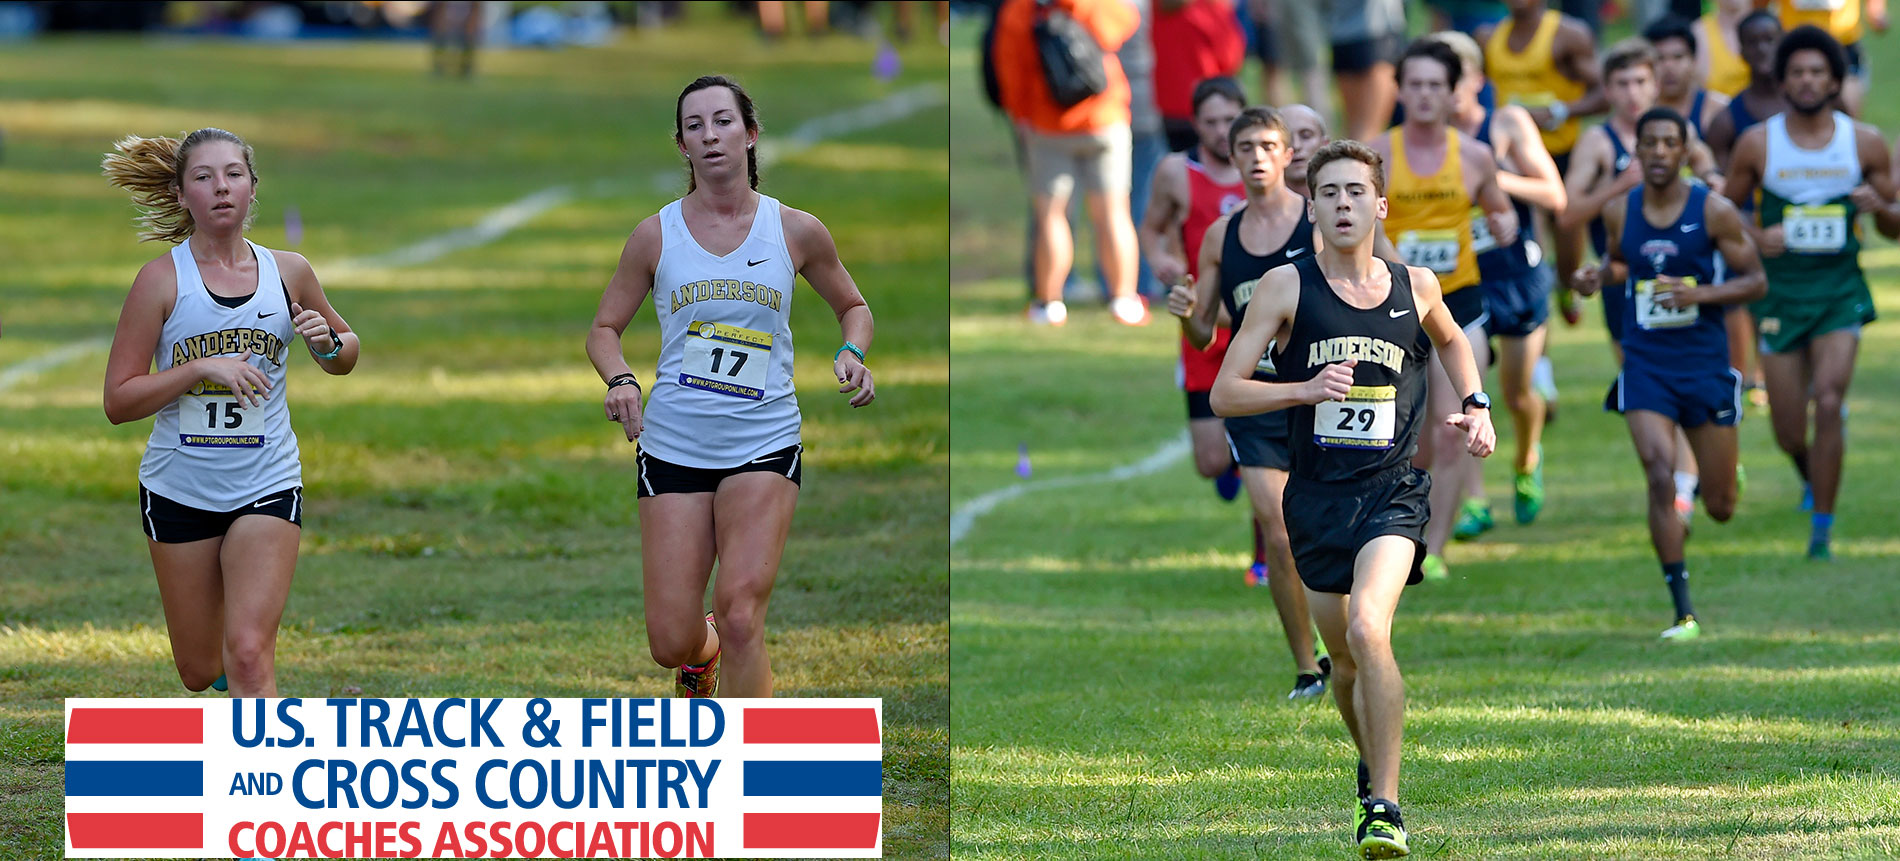 Women’s Cross Country Ranked Third; Men’s Cross Country Tabbed Fifth in Latest USTFCCCA Southeast Region Poll